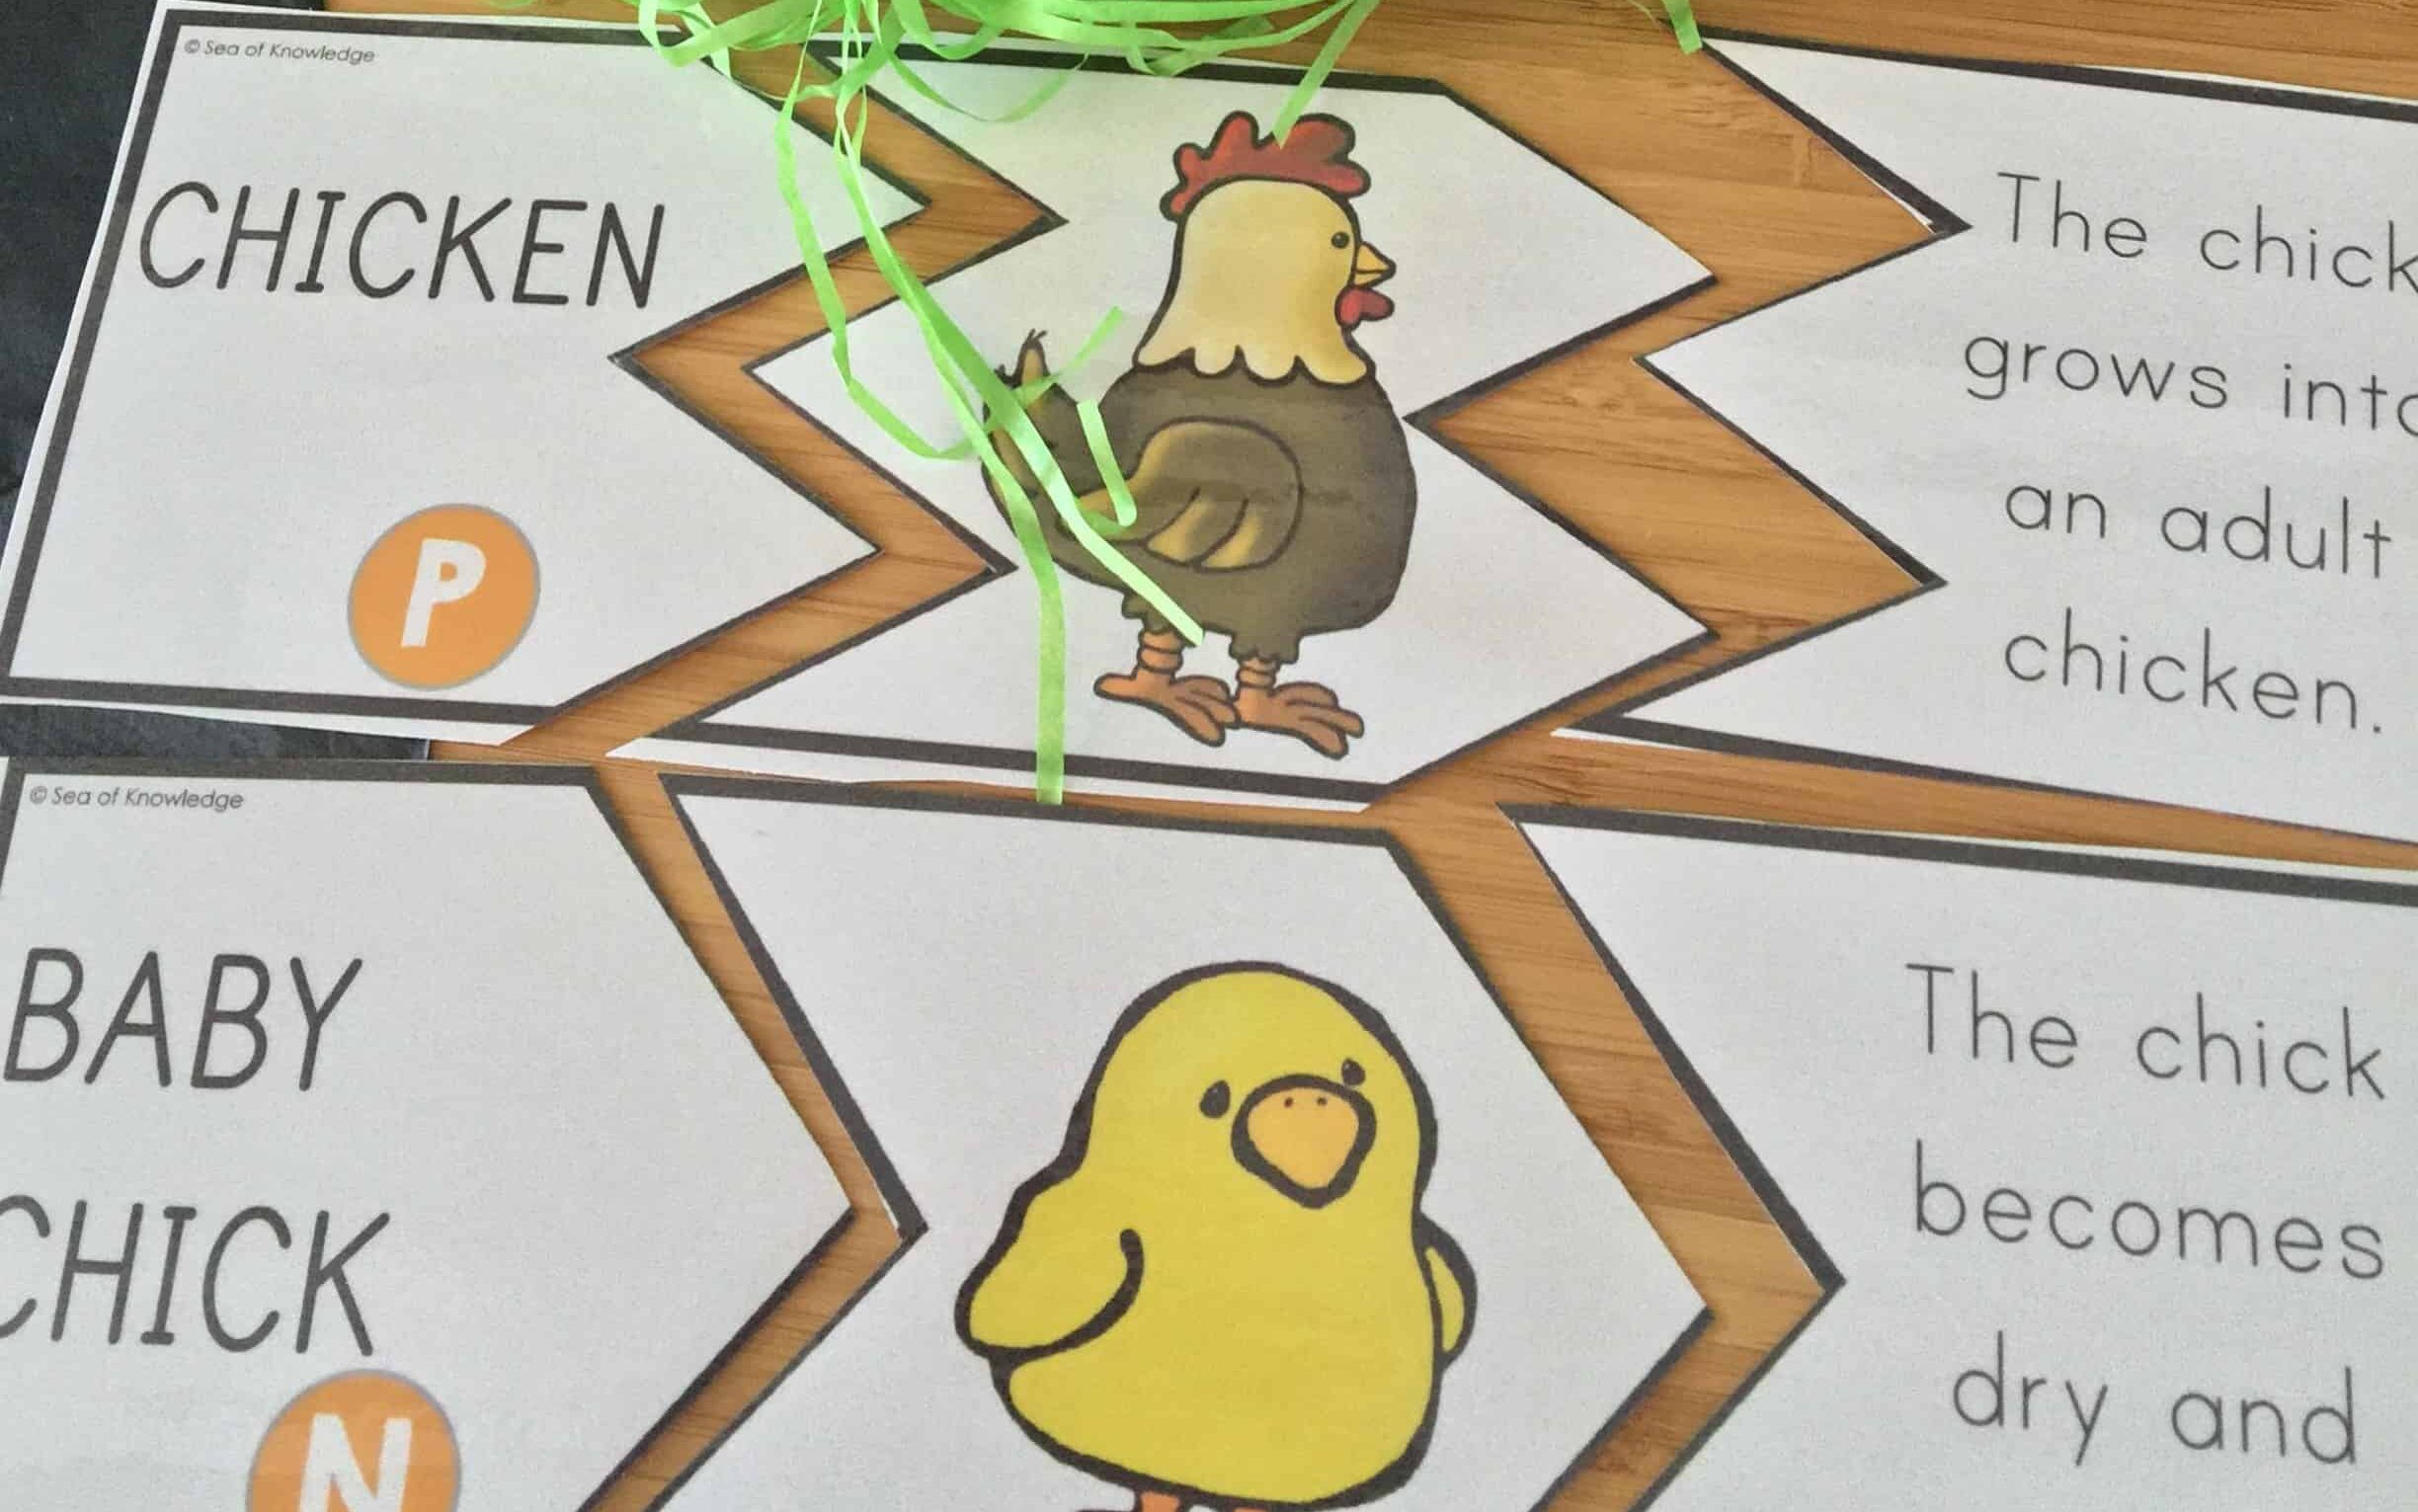 Fantastic activities to teach chicken life cycle